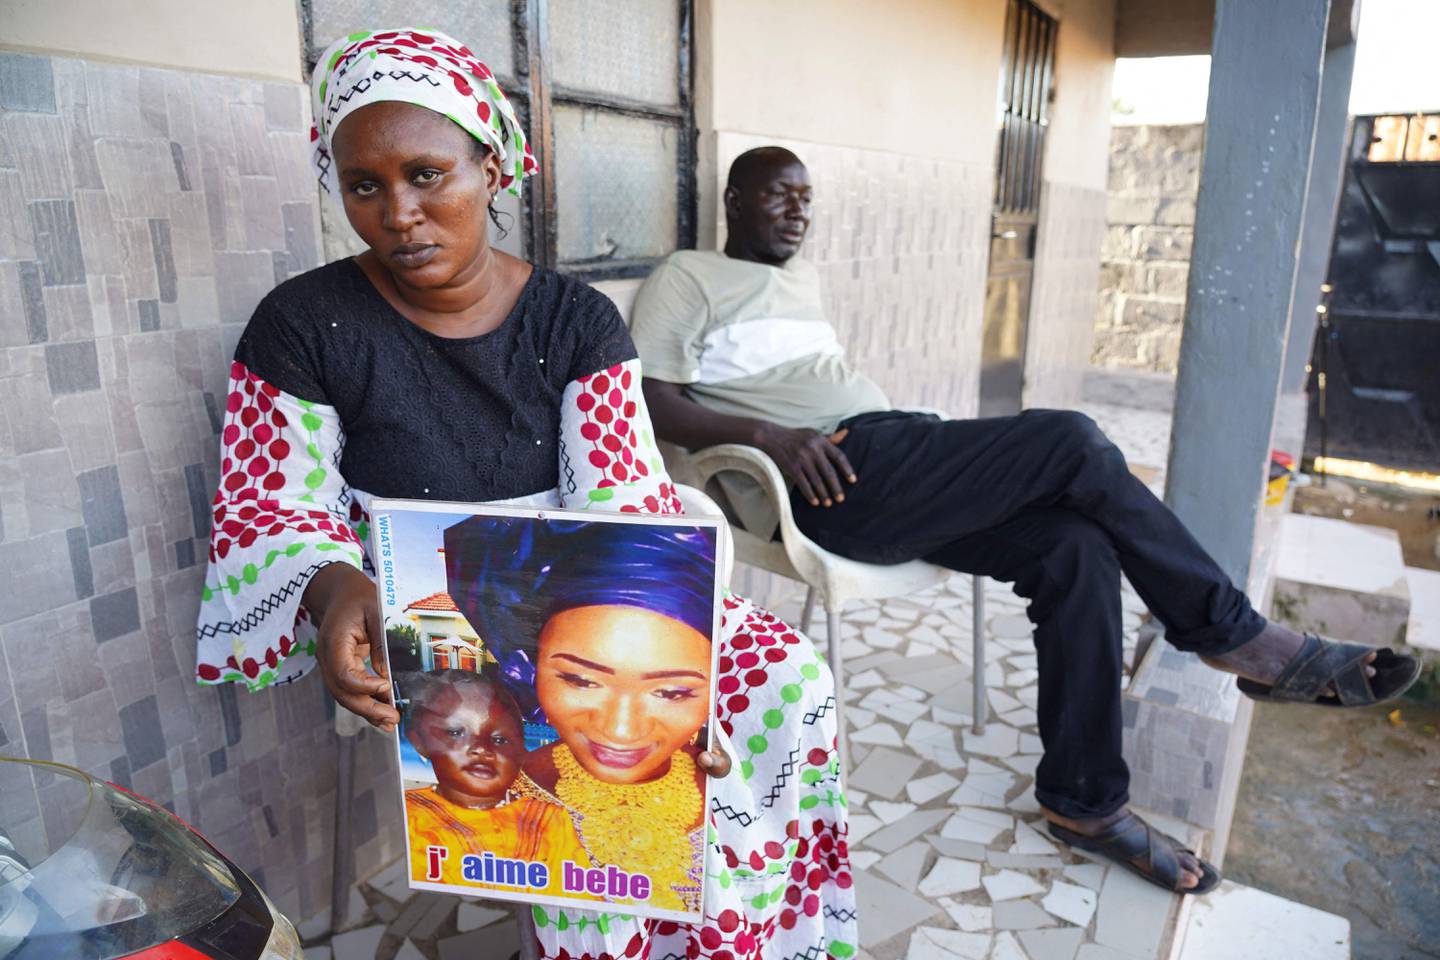 Mariama Kuyateh, 30, holds up a picture of her son Musa who died of acute kidney failure in Banjul on October 10. AFP